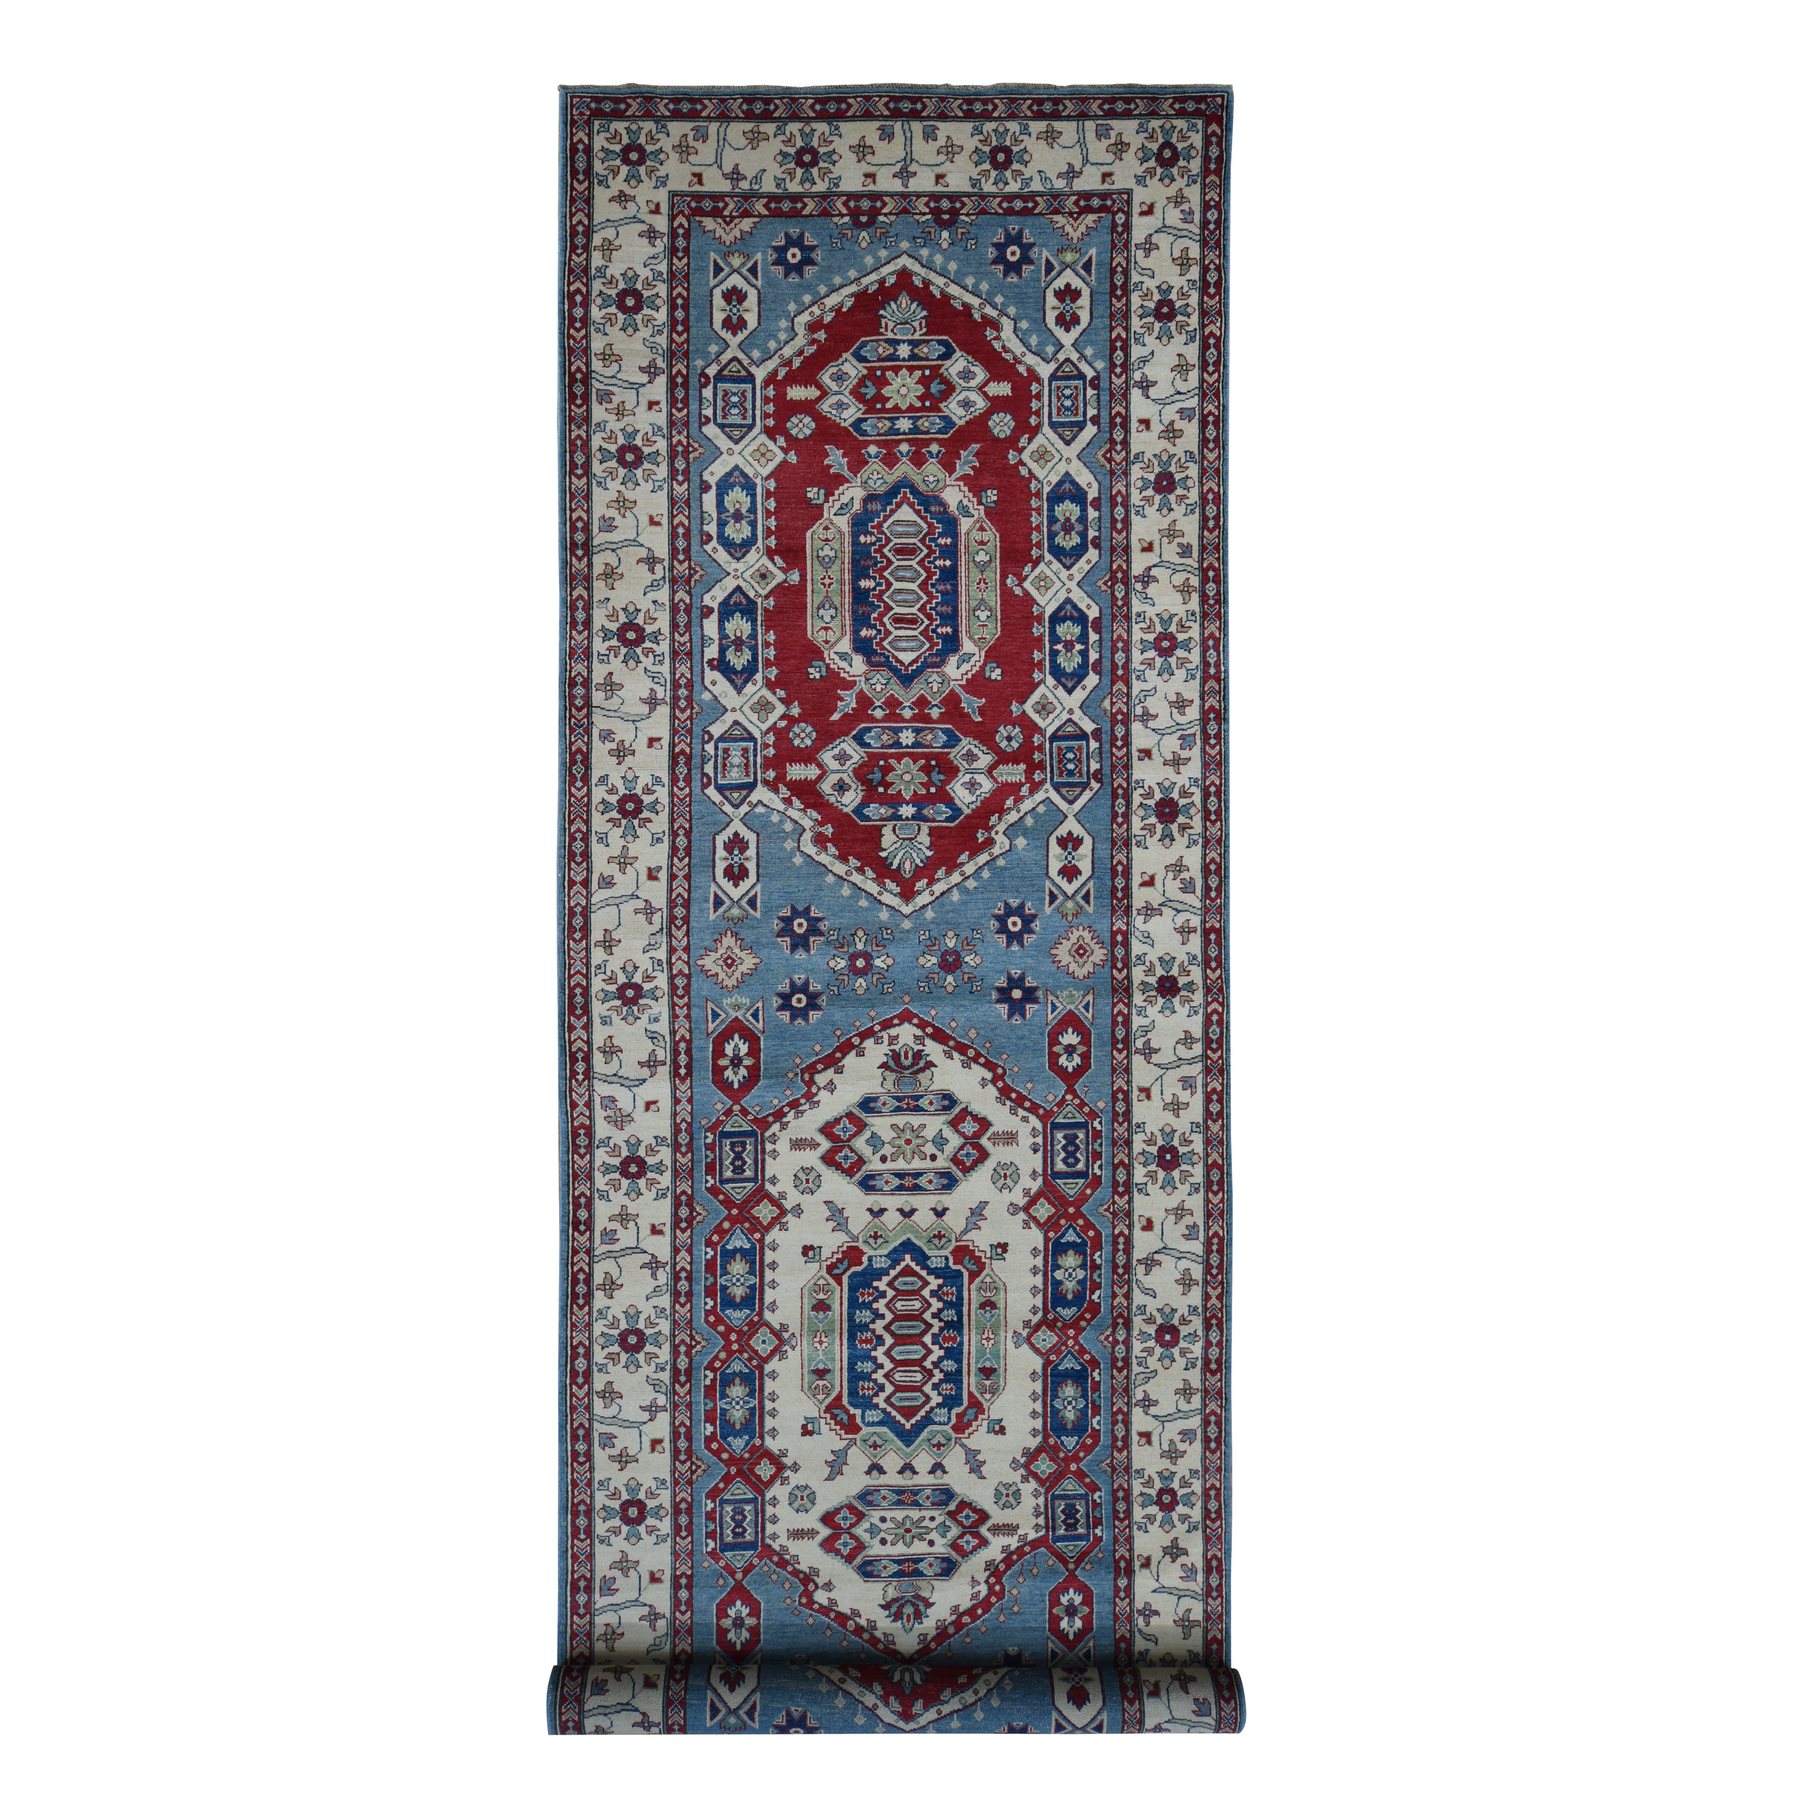  Wool Hand-Knotted Area Rug 5'3